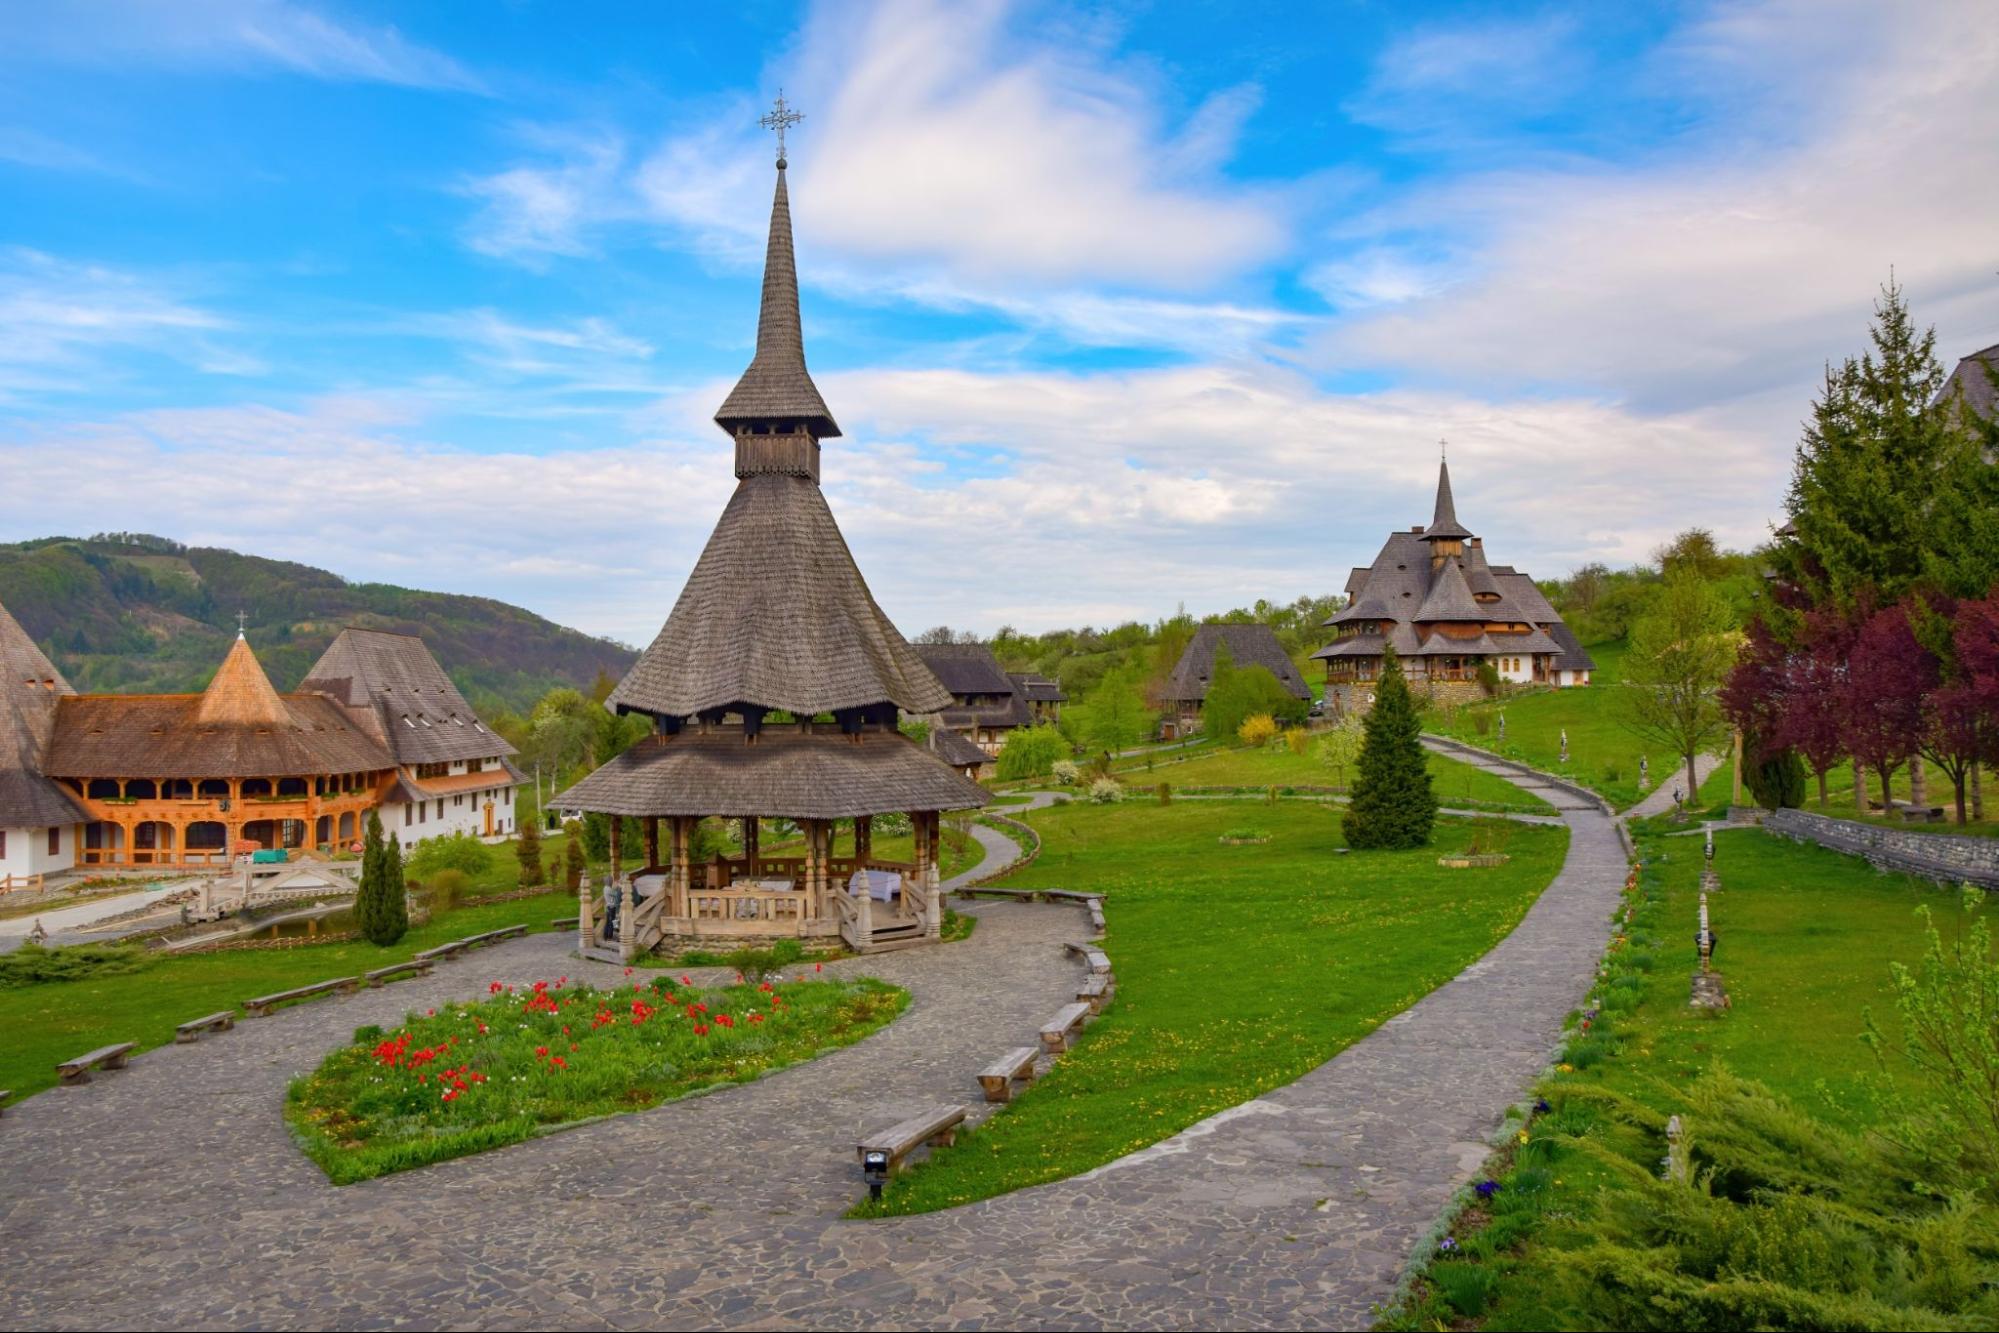 Traditional Maramures wooden architecture of Barsana monastery, Romania at sunny spring day. Picturesque sky